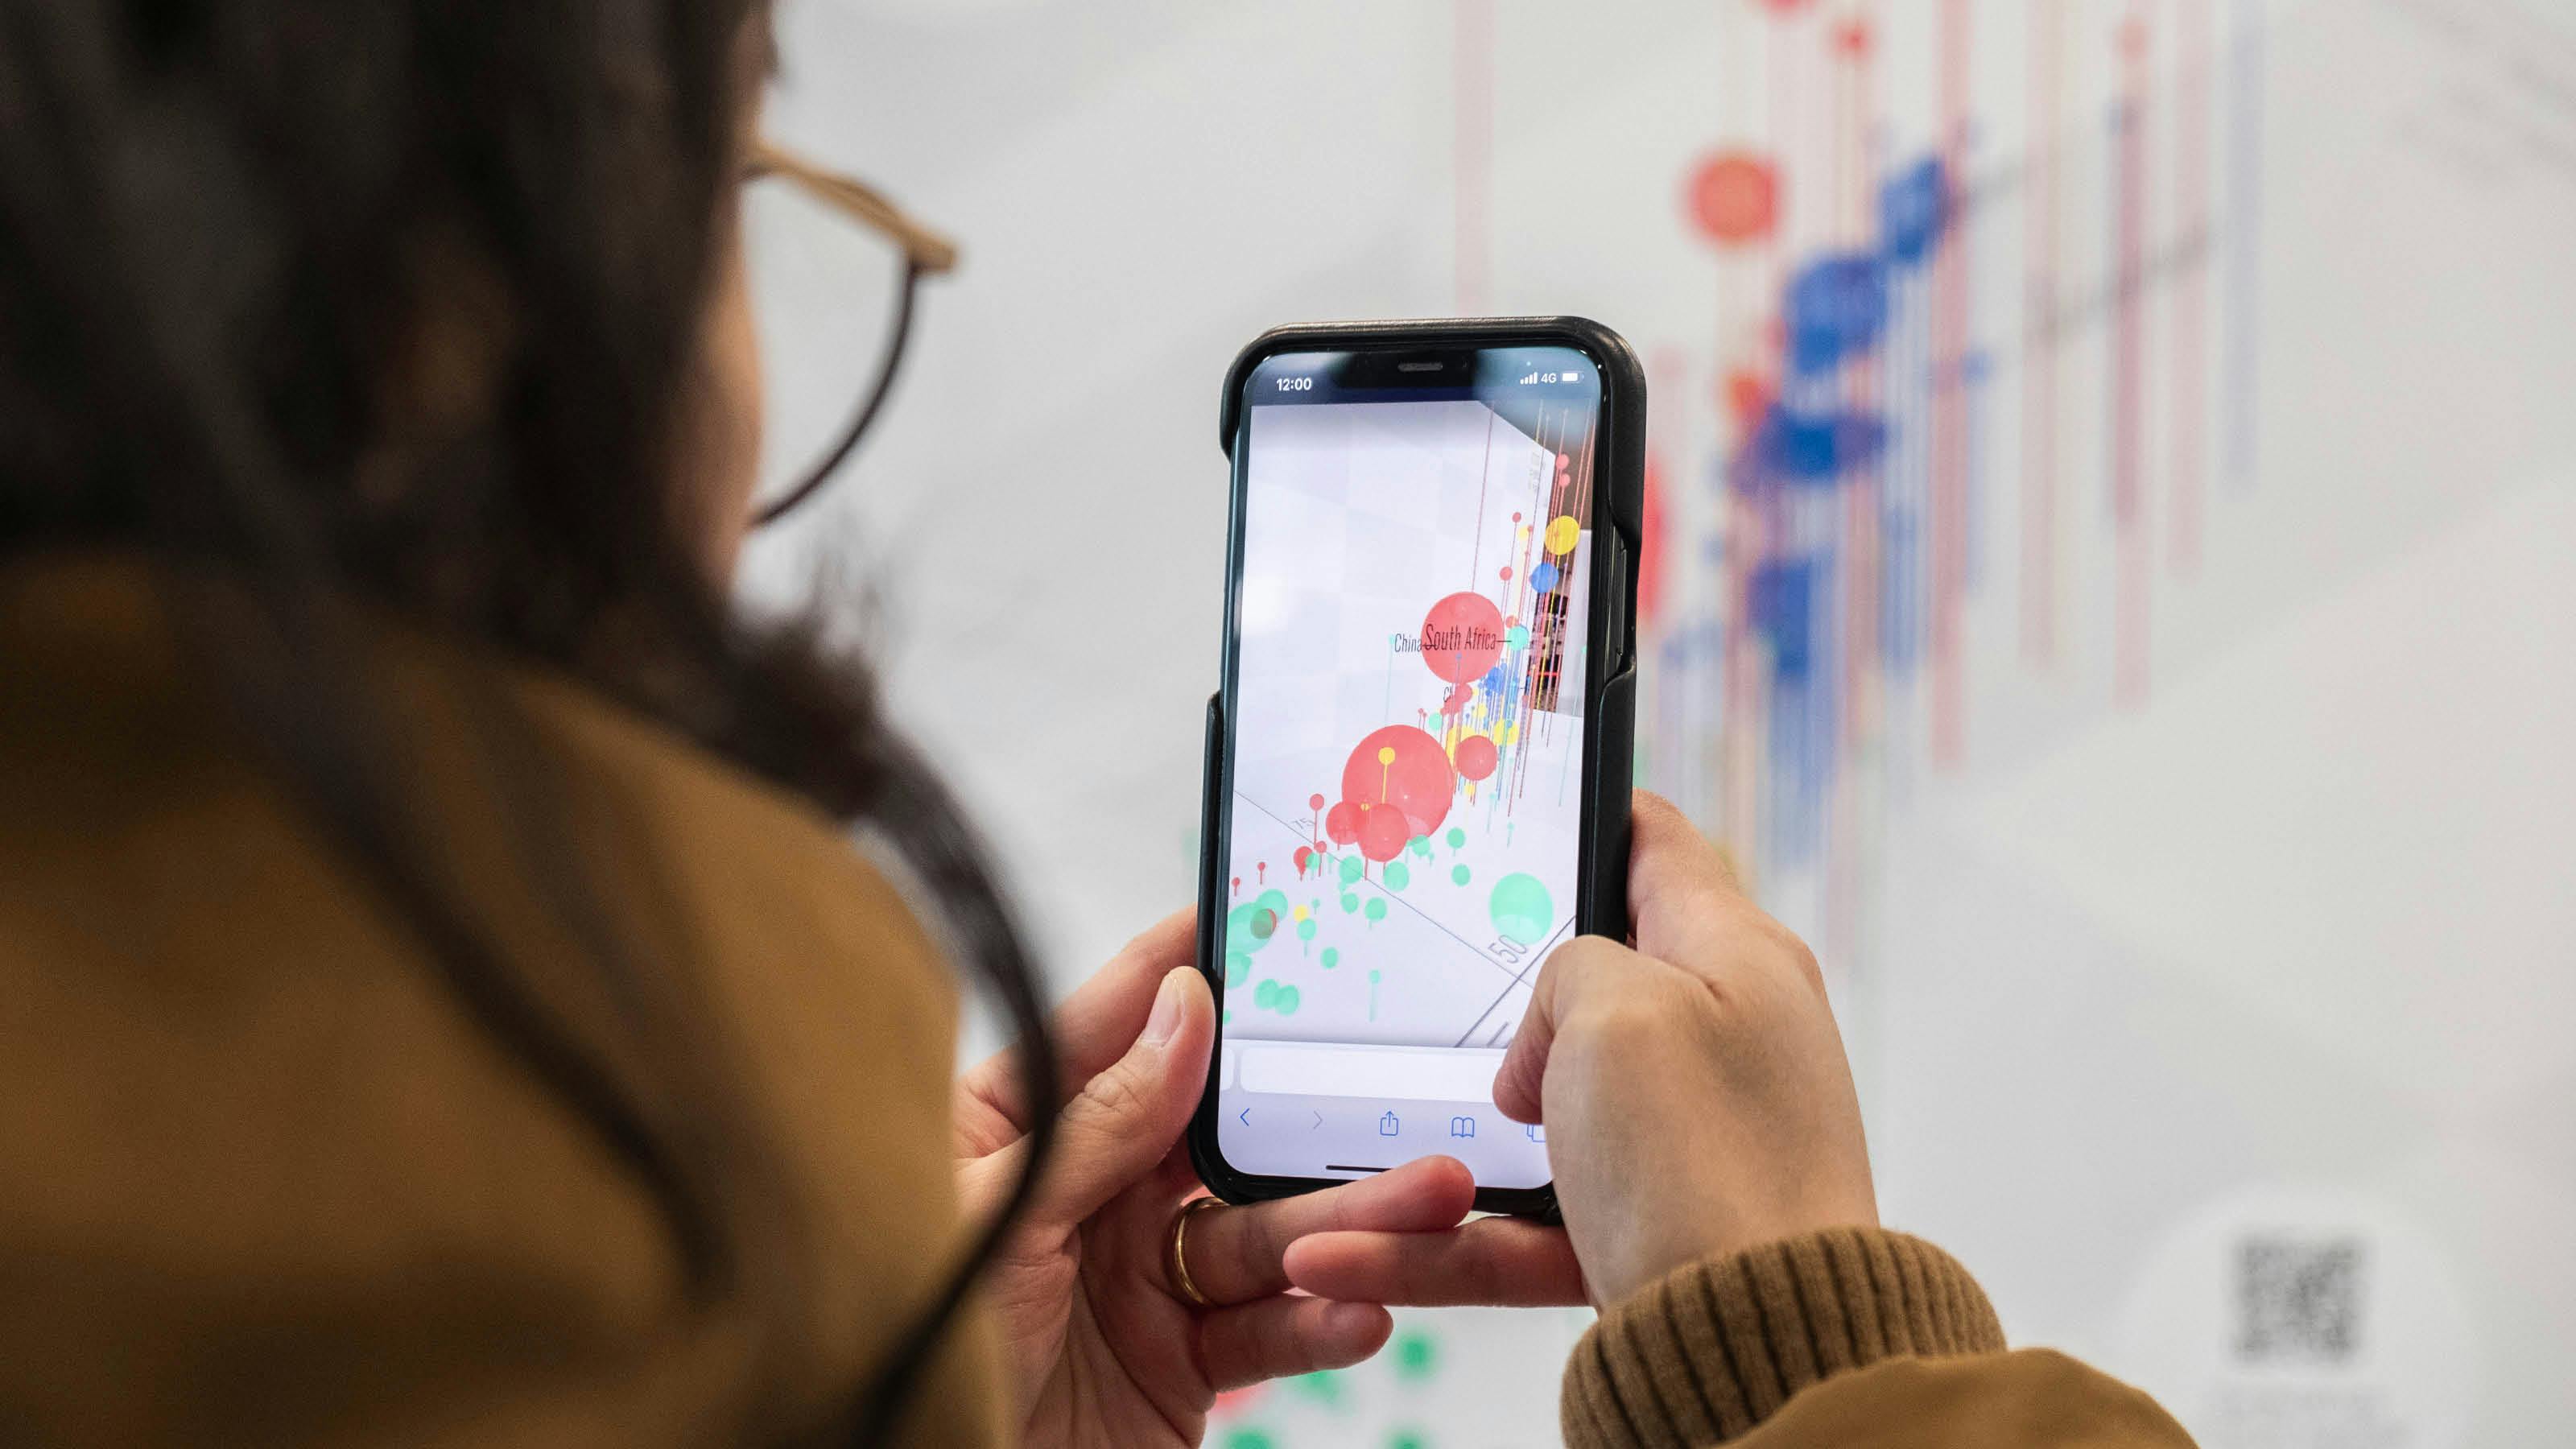 In the image, a person is holding an iPhone to take a photo of a white board with colorful dots and lines on it.